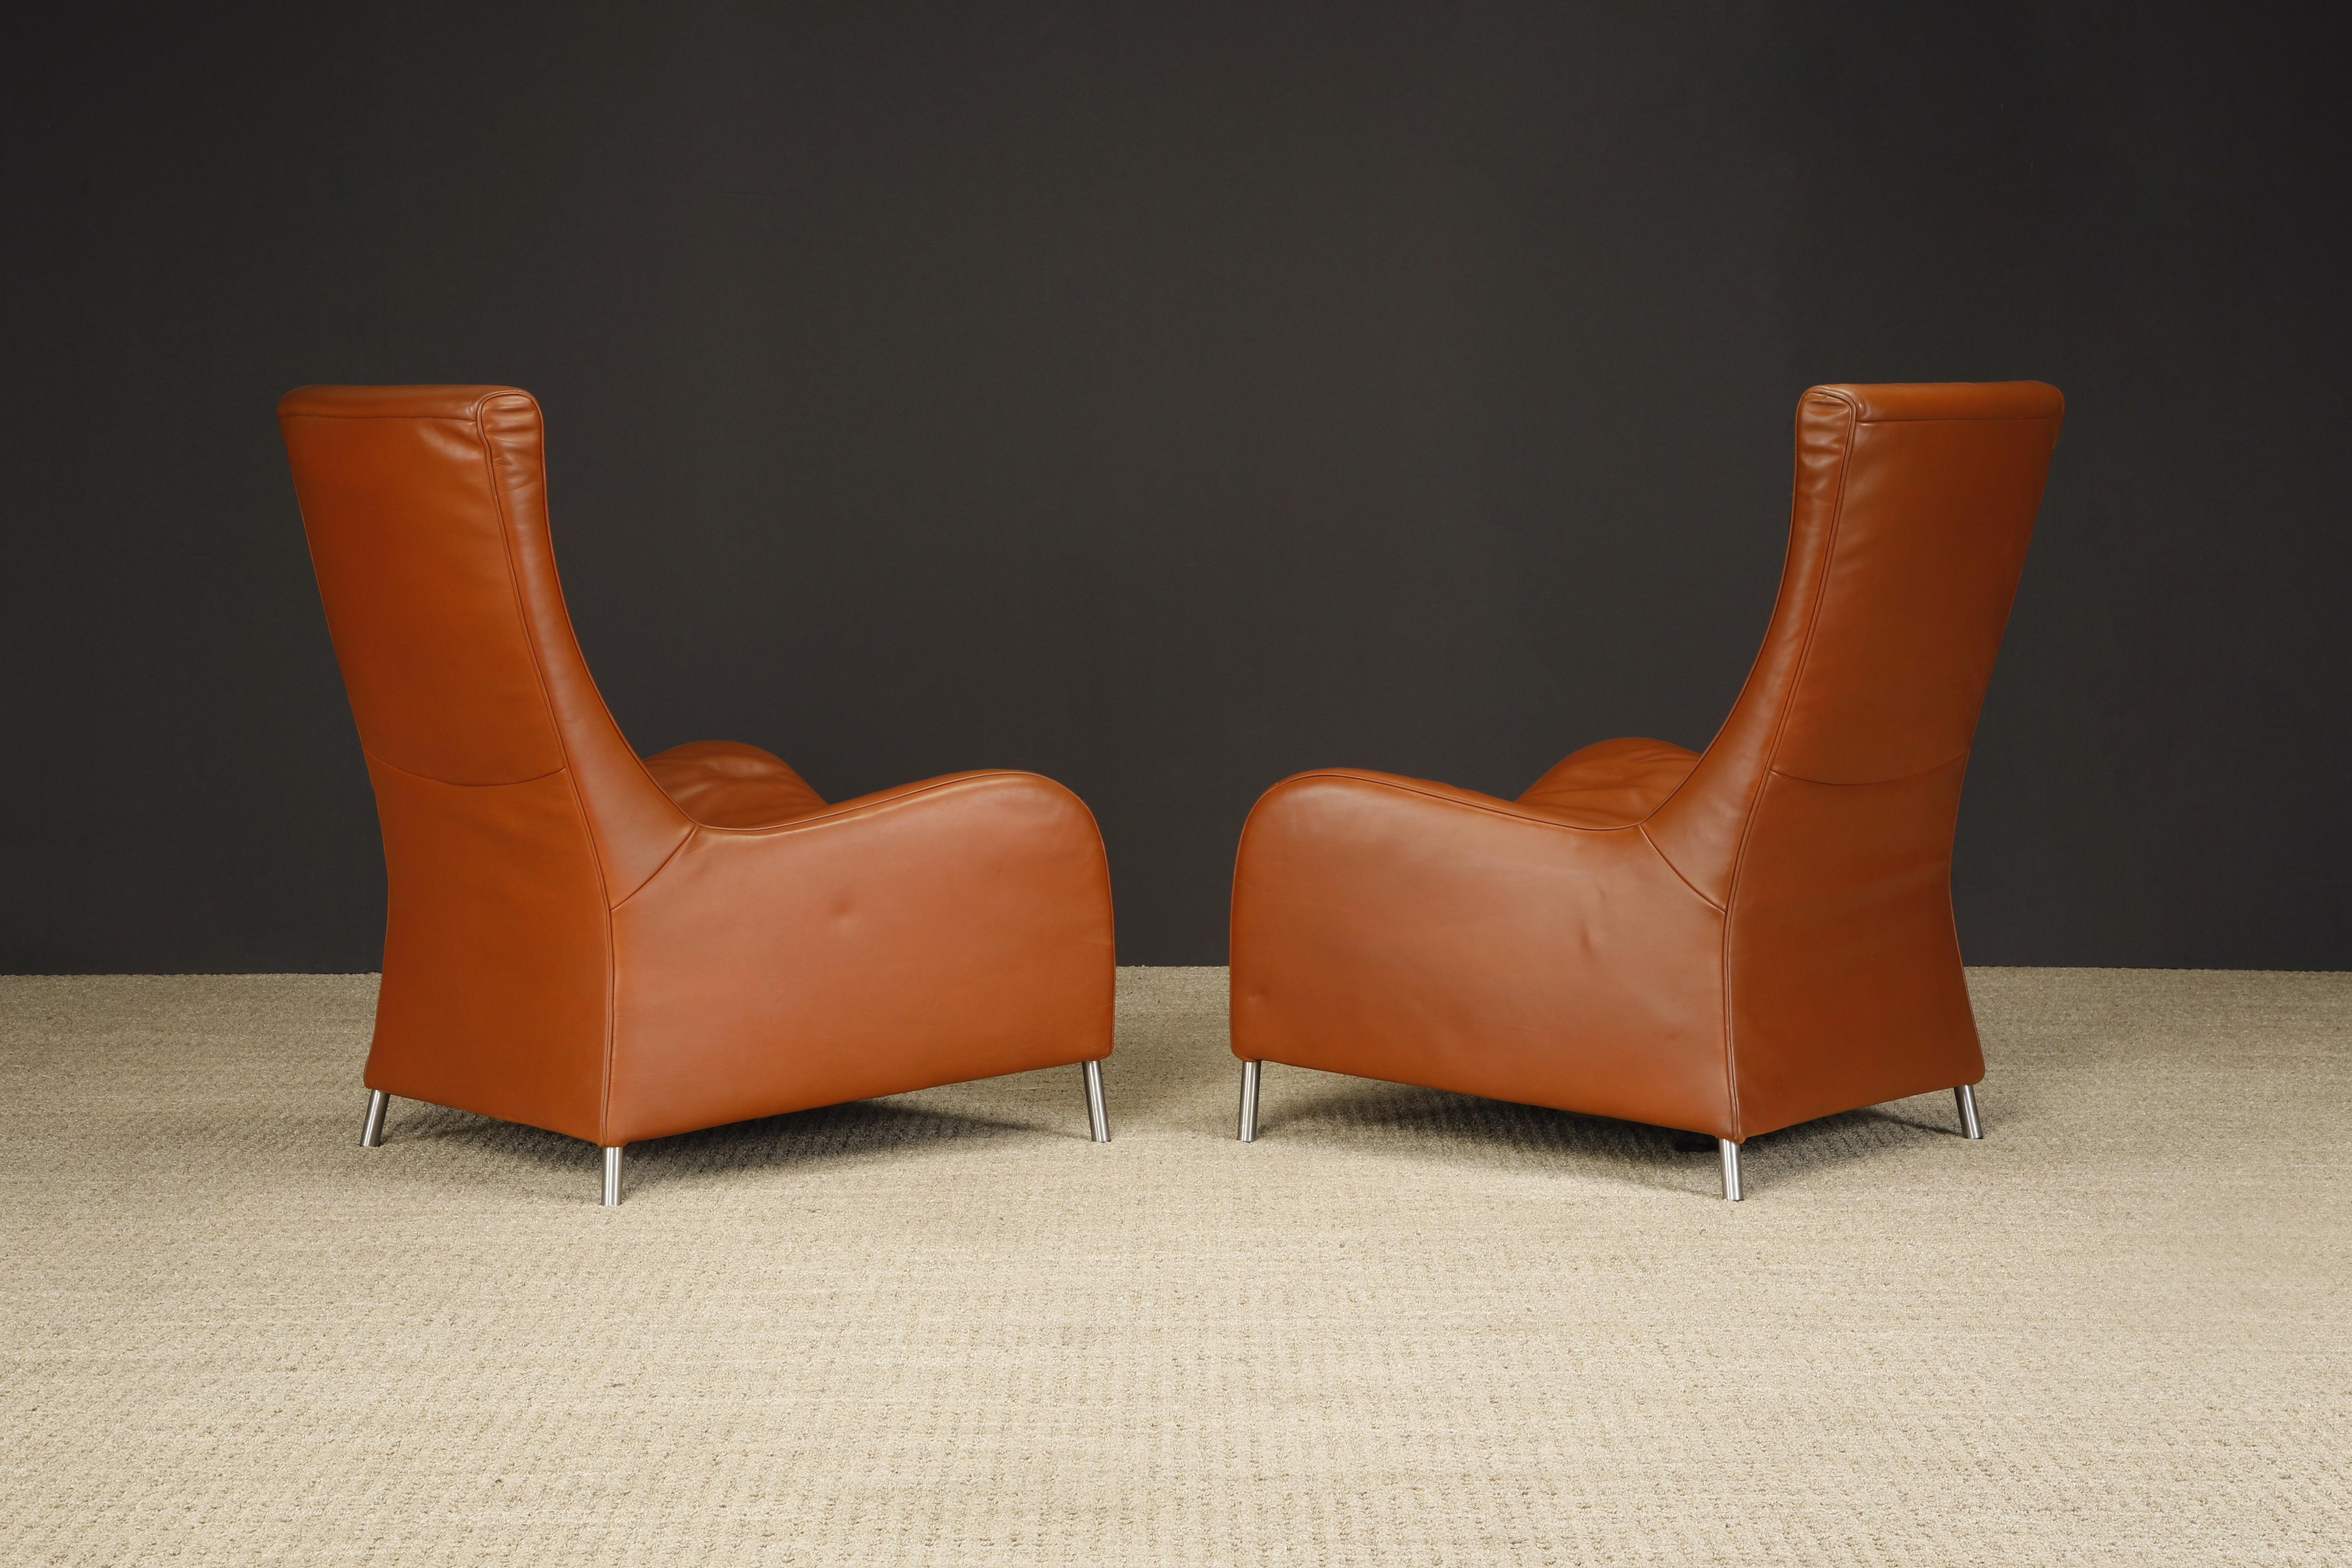 Late 20th Century Cognac Leather Lounge Chairs by Mathias Hoffmann for De Sede, 1980s, Signed For Sale